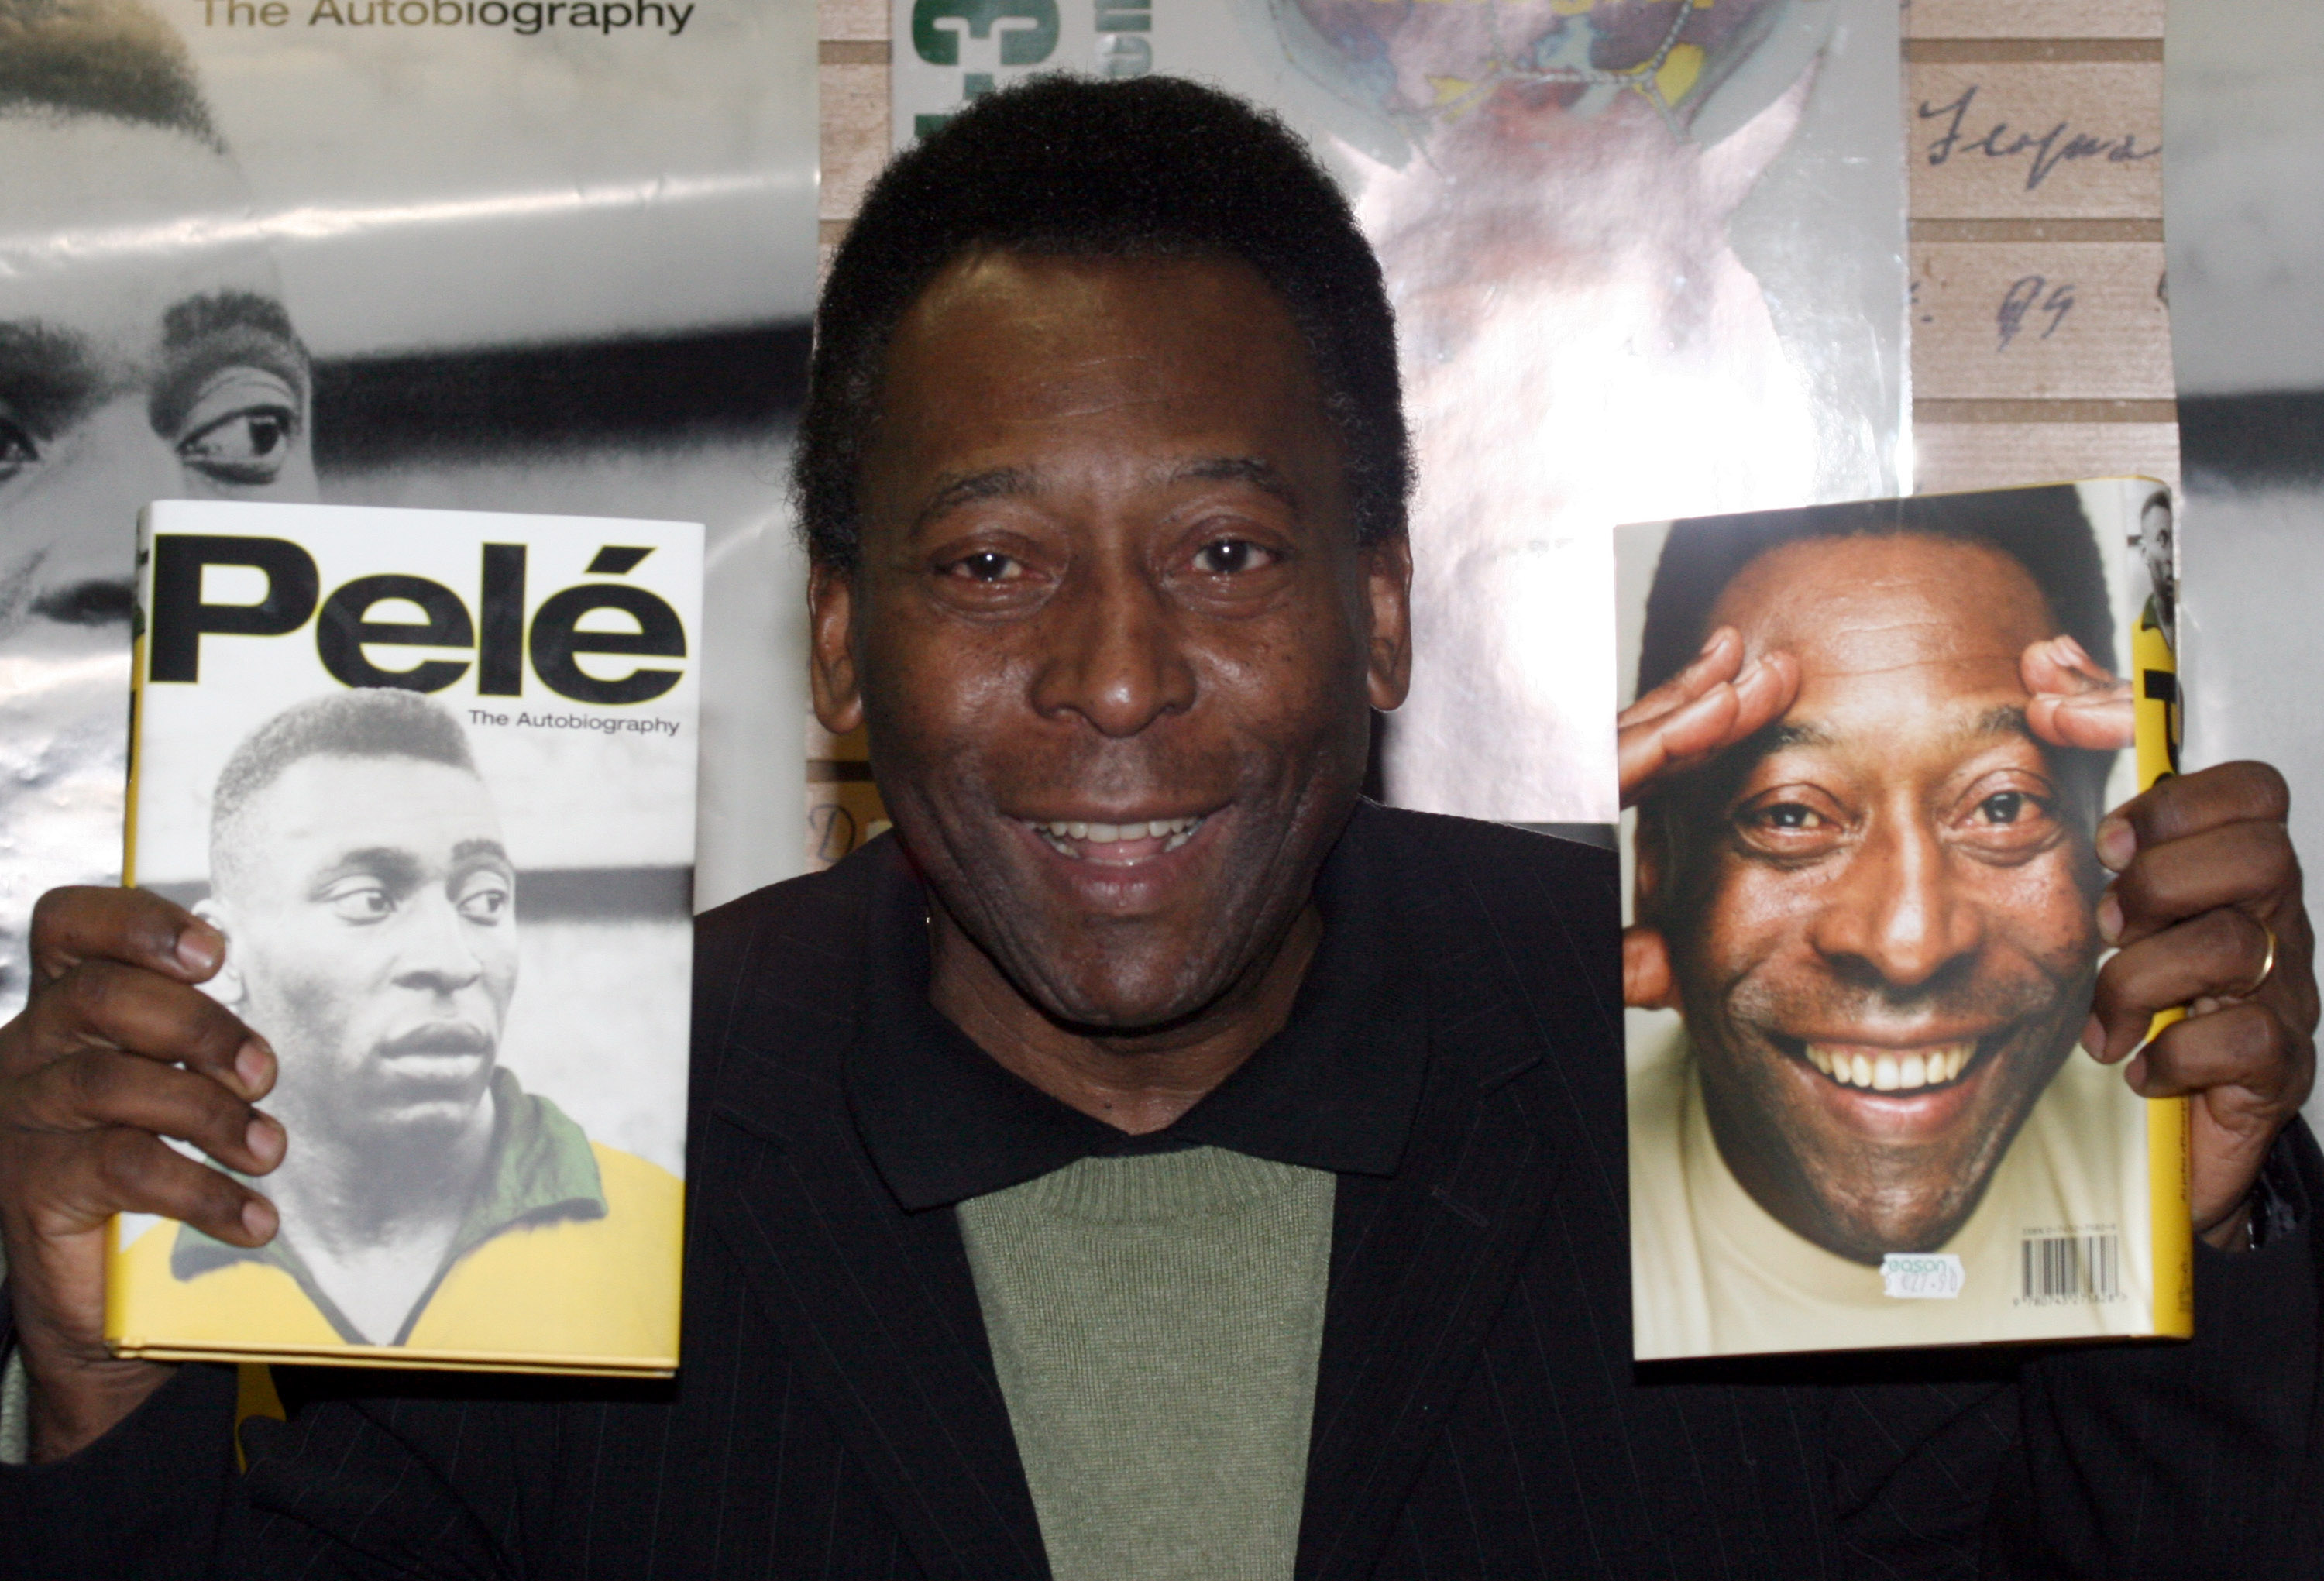 What Is Soccer Legend Pelé’s Real Name?